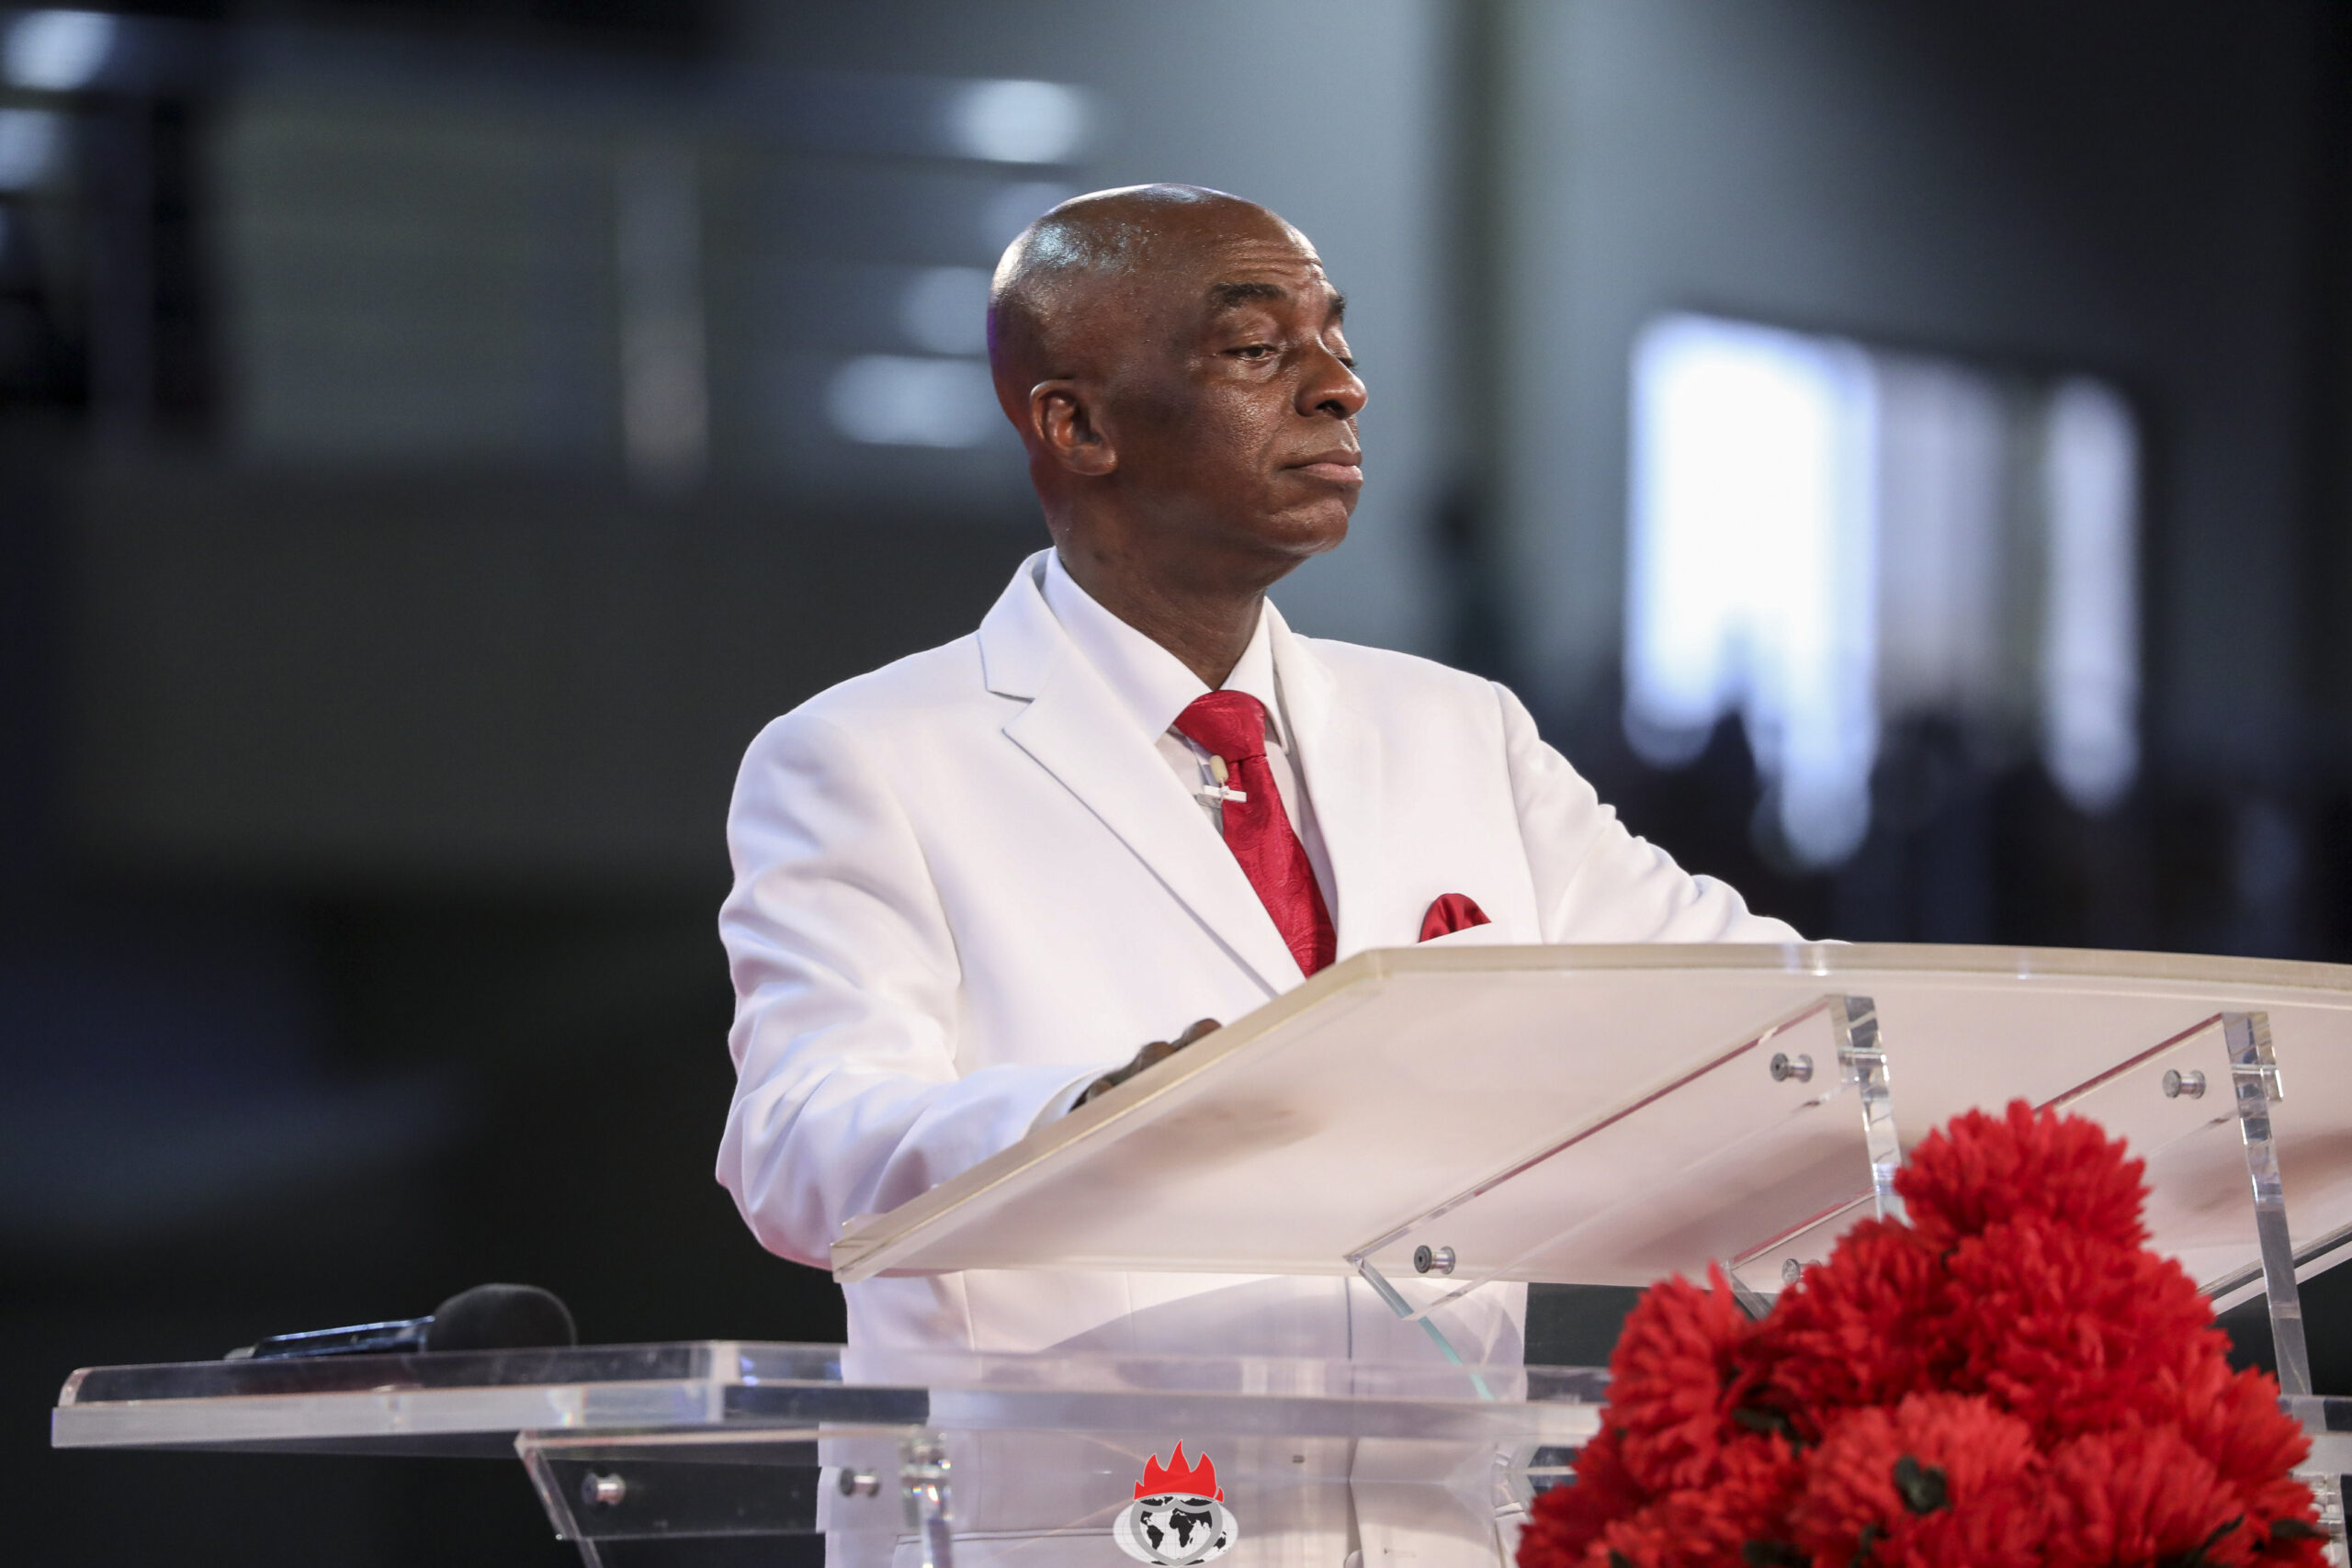 Bishop David Oyedepo - The Richest Pastor in Nigeria and Africa